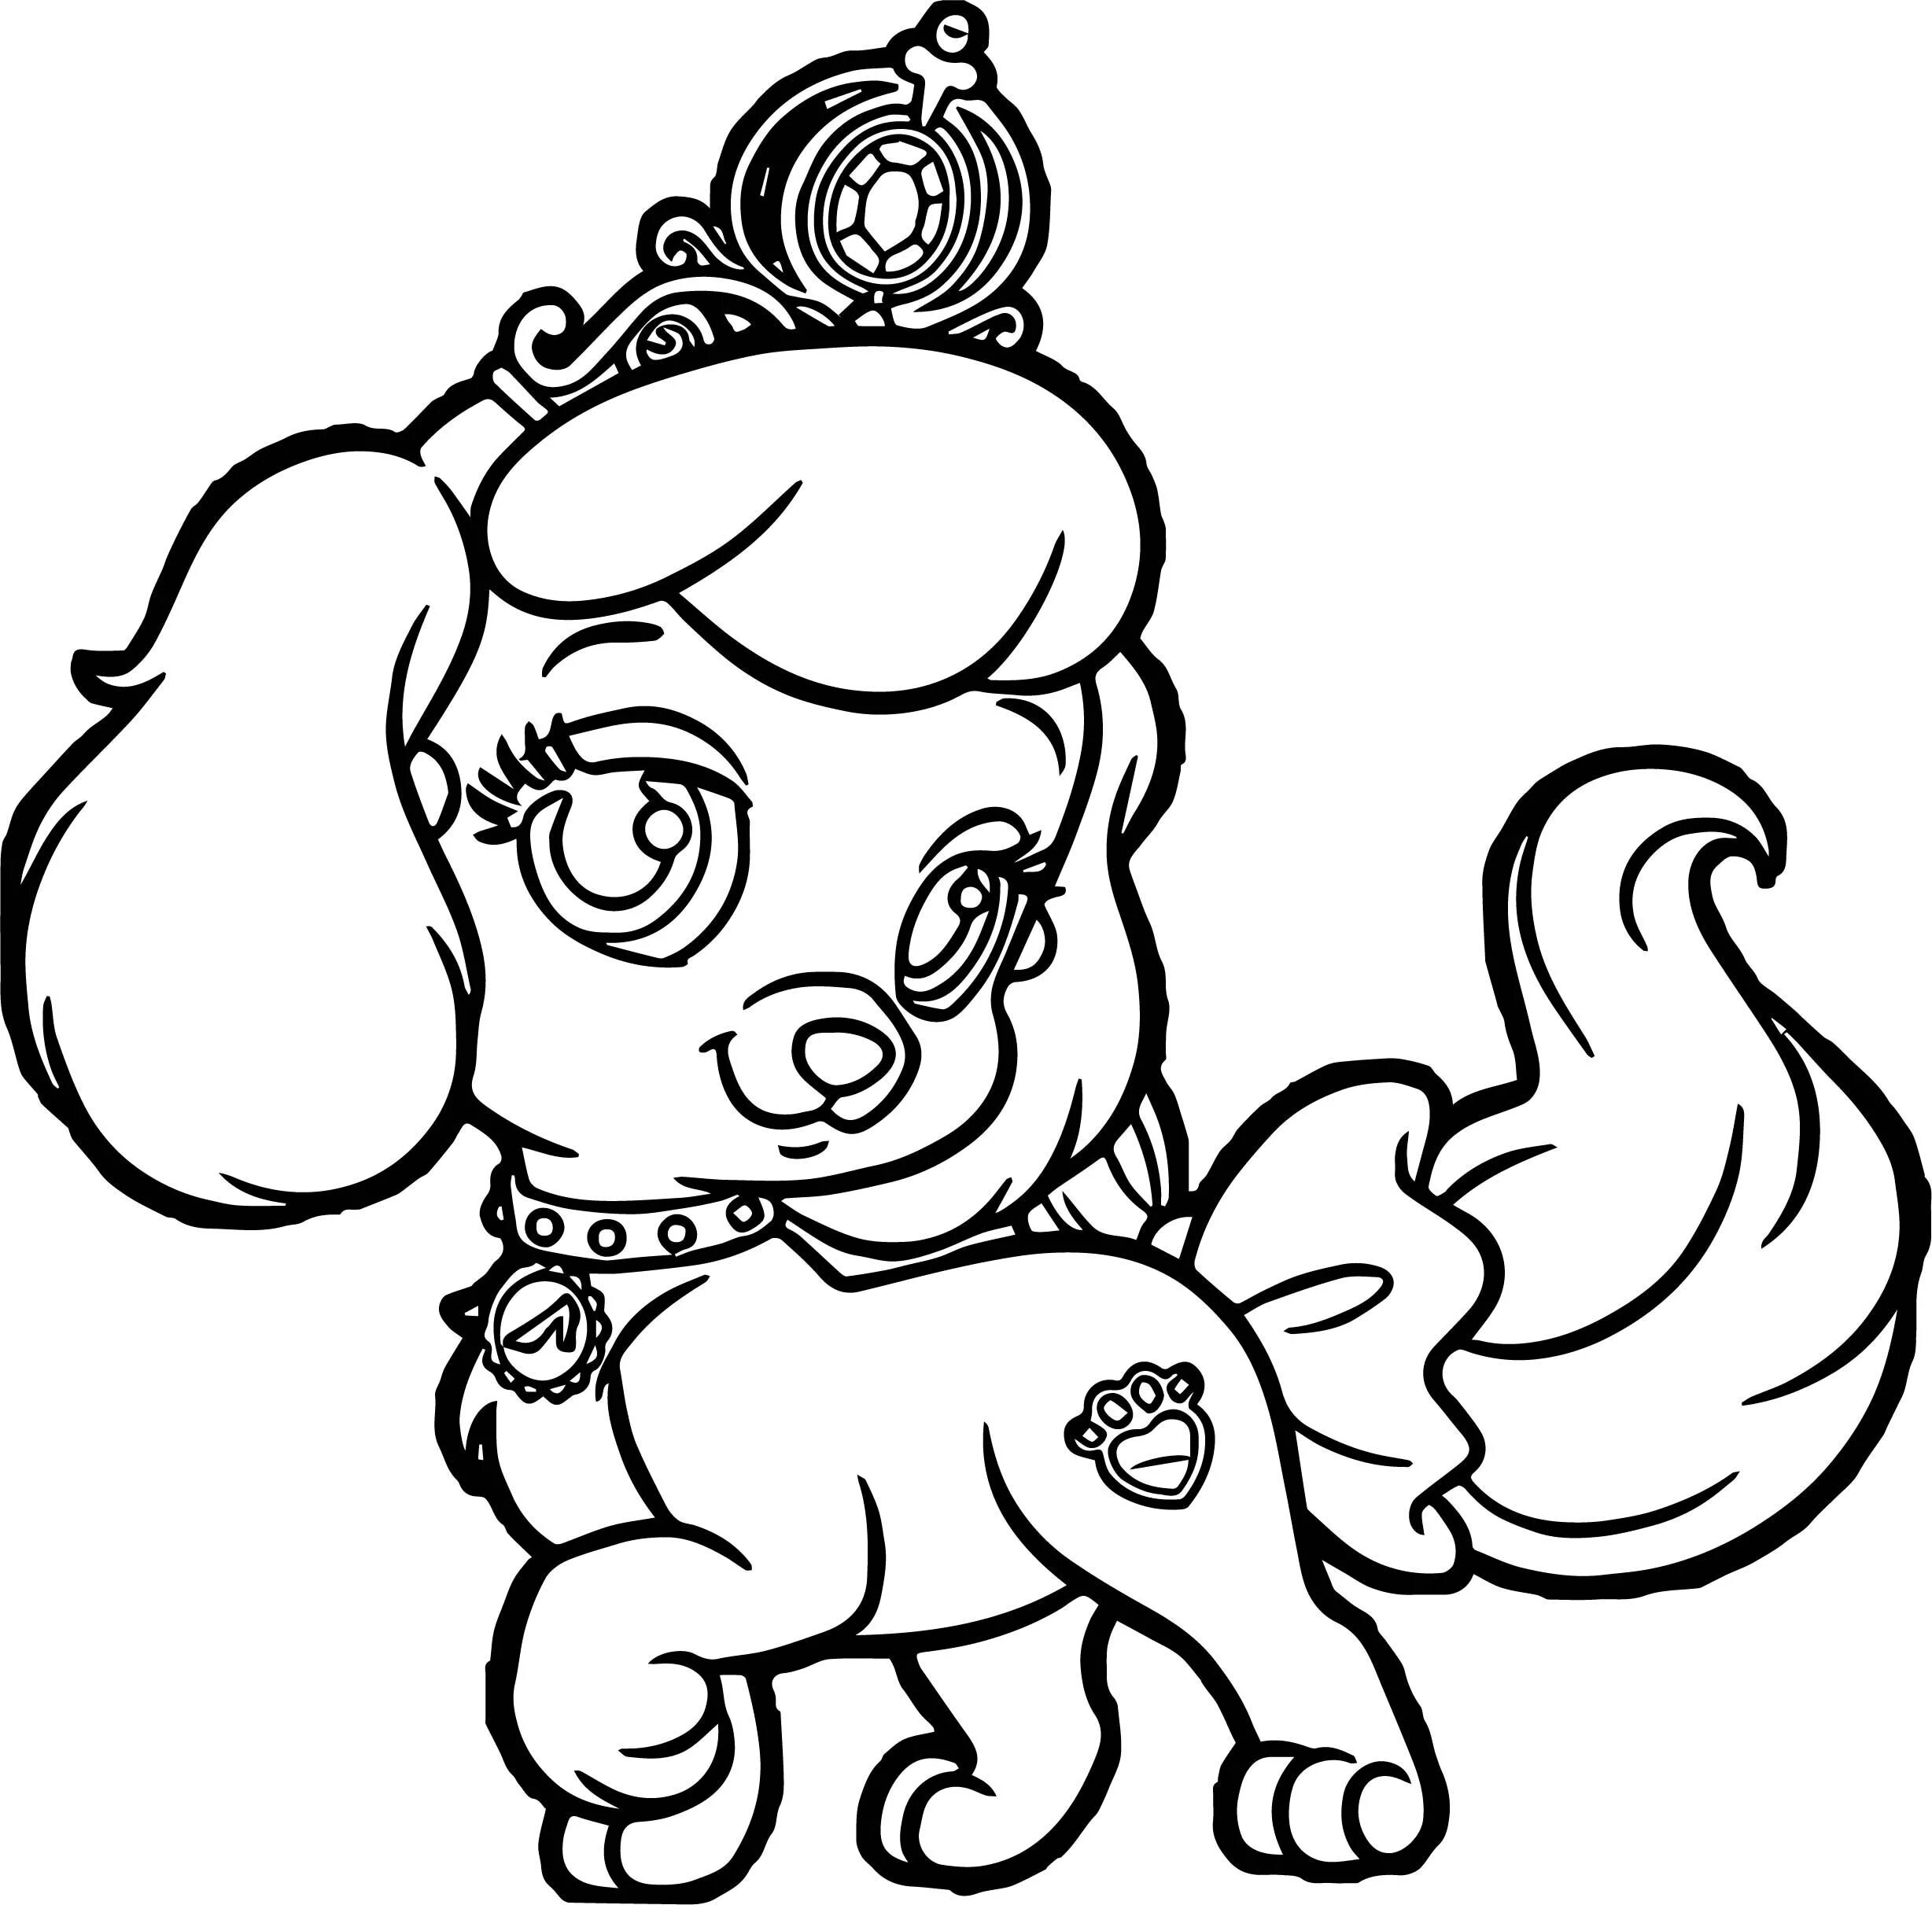 Wiggly little dog coloring page